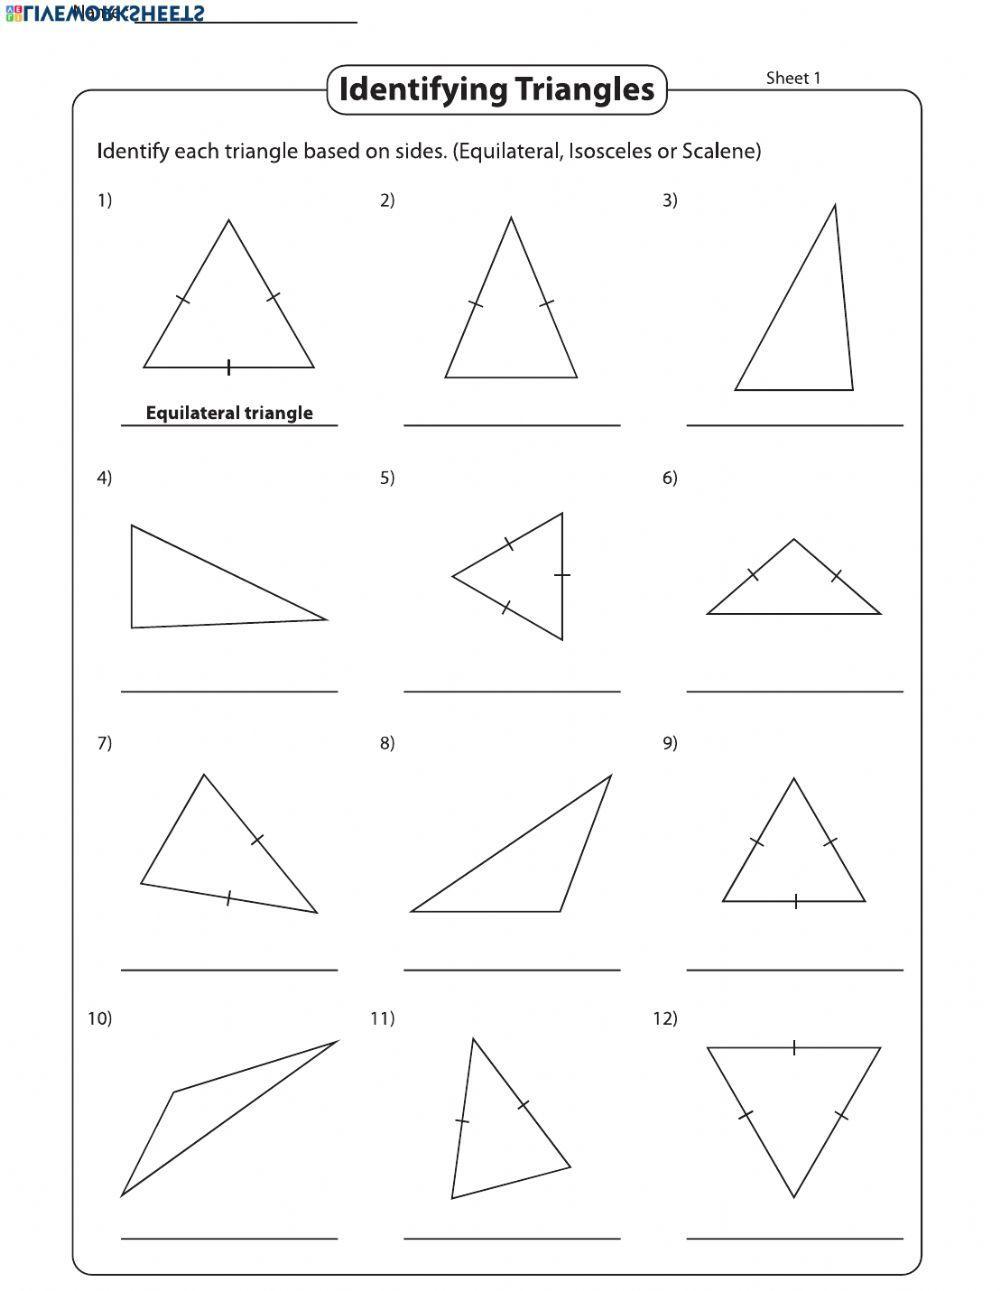 Classifying triangles worksheets